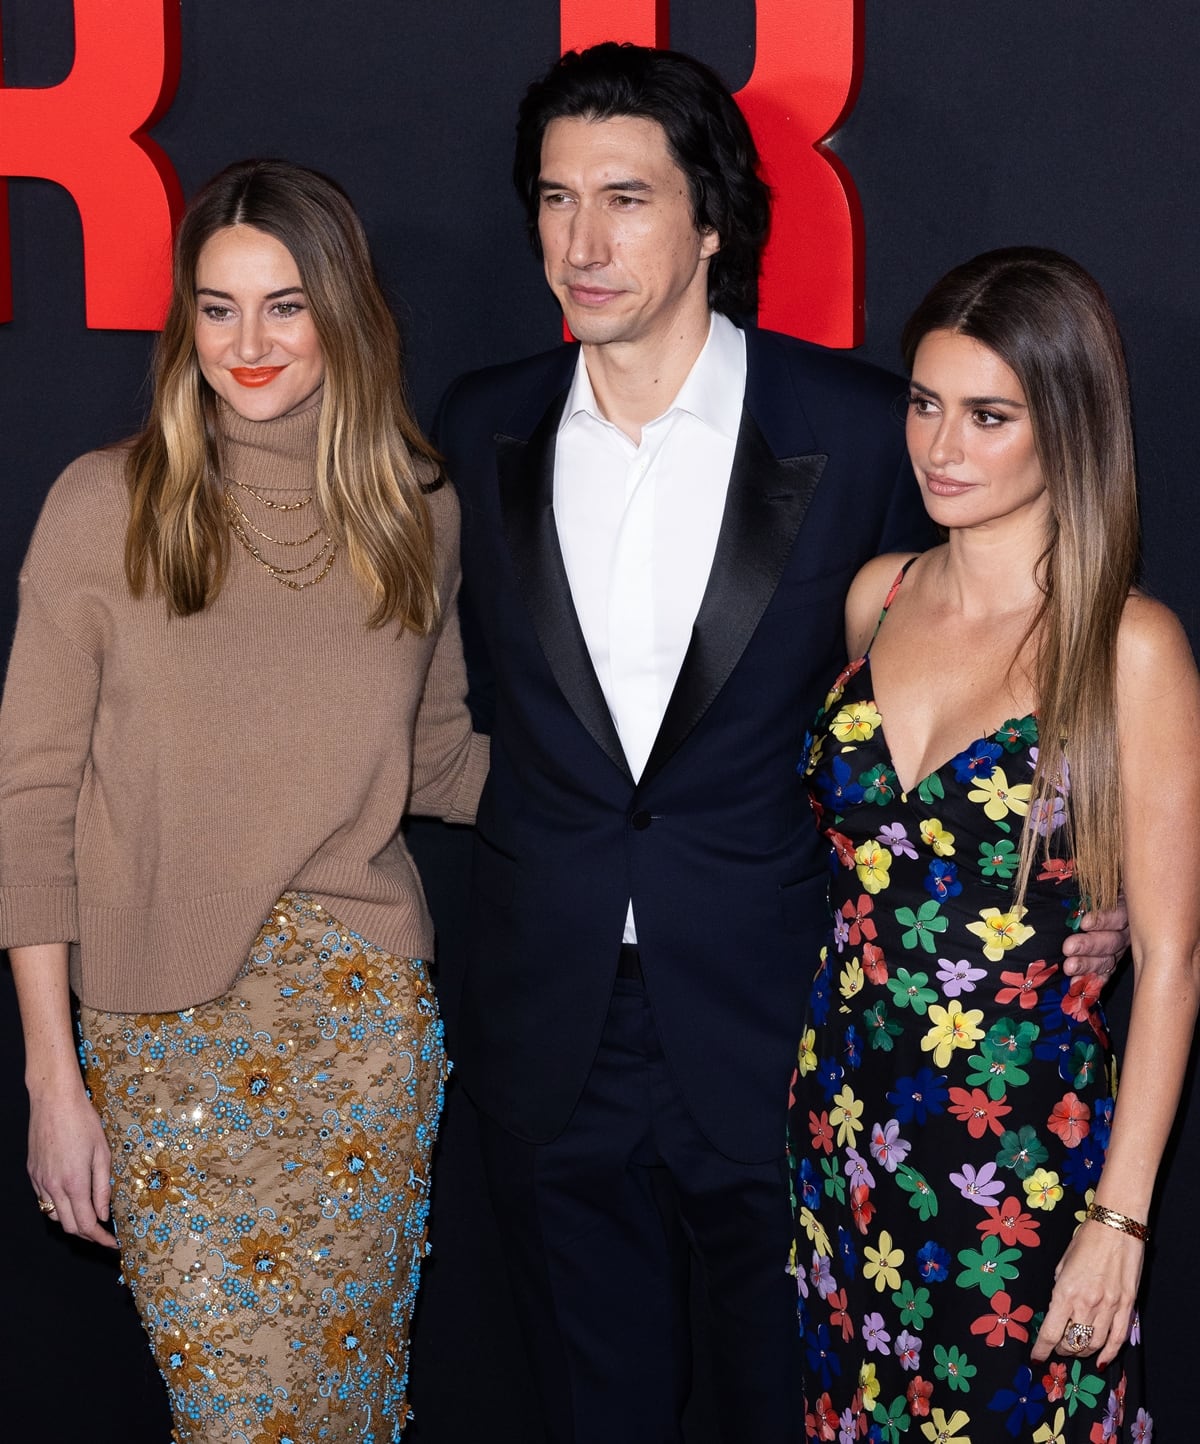 Adam Driver, standing tall at 6ft 2 ¼ inches (188.6 cm), towers over Penelope Cruz (5ft 4 inches, 162.6 cm) and Shailene Woodley (5ft 7 ¾ inches, 172.1 cm) on the red carpet, highlighting the striking height difference among the 'Ferrari' film's stars